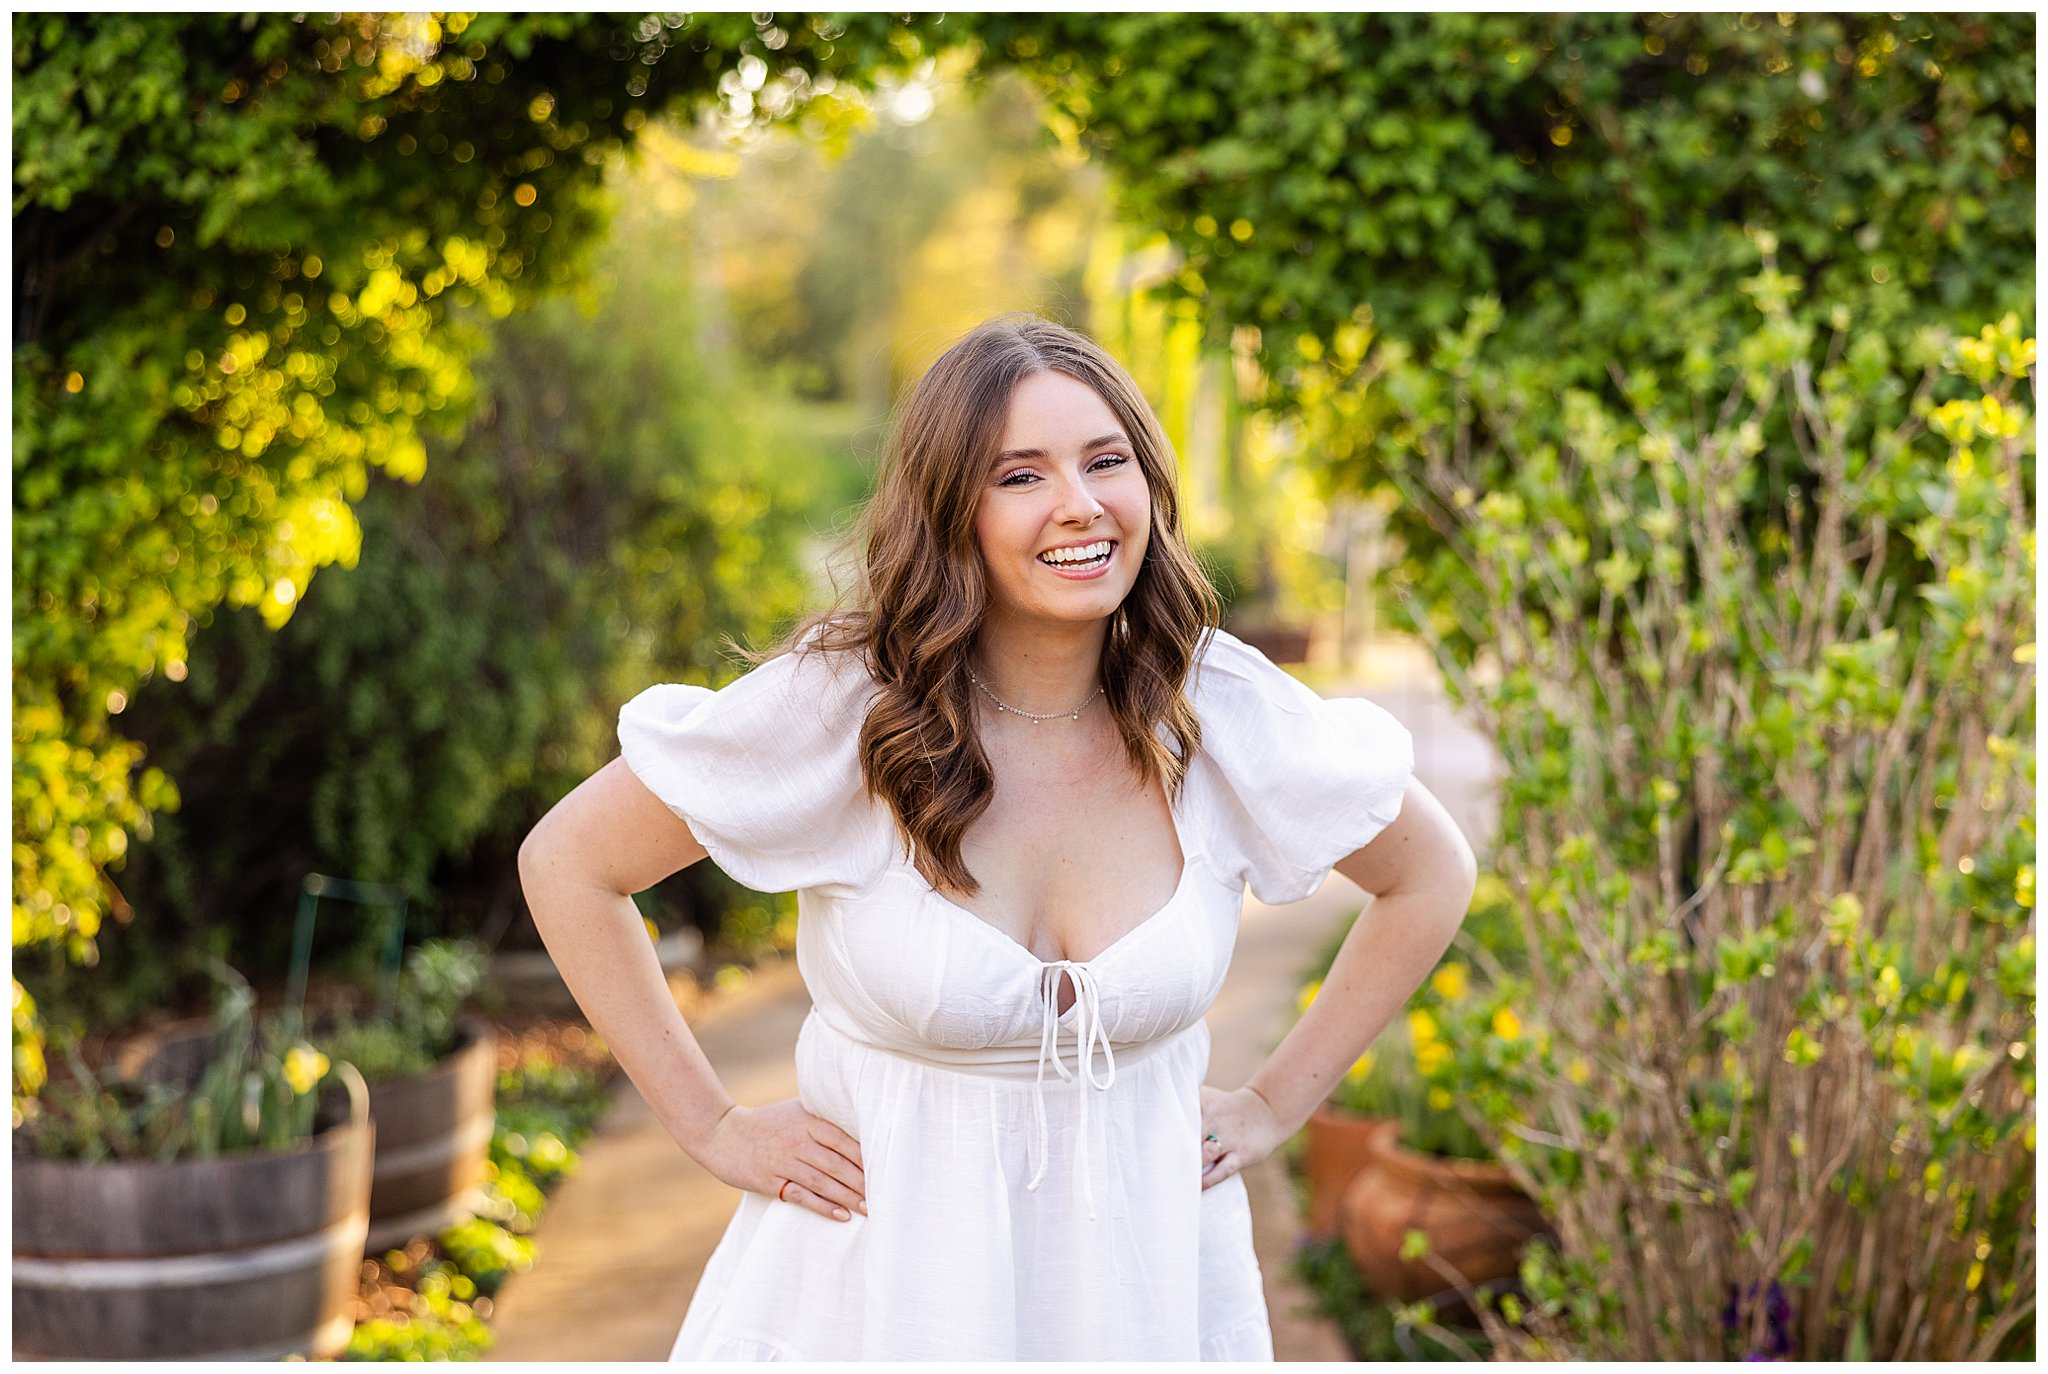 White Ranch Events High School Senior Session Chico CA Willow Tree Field White Dress Arch Spring April,